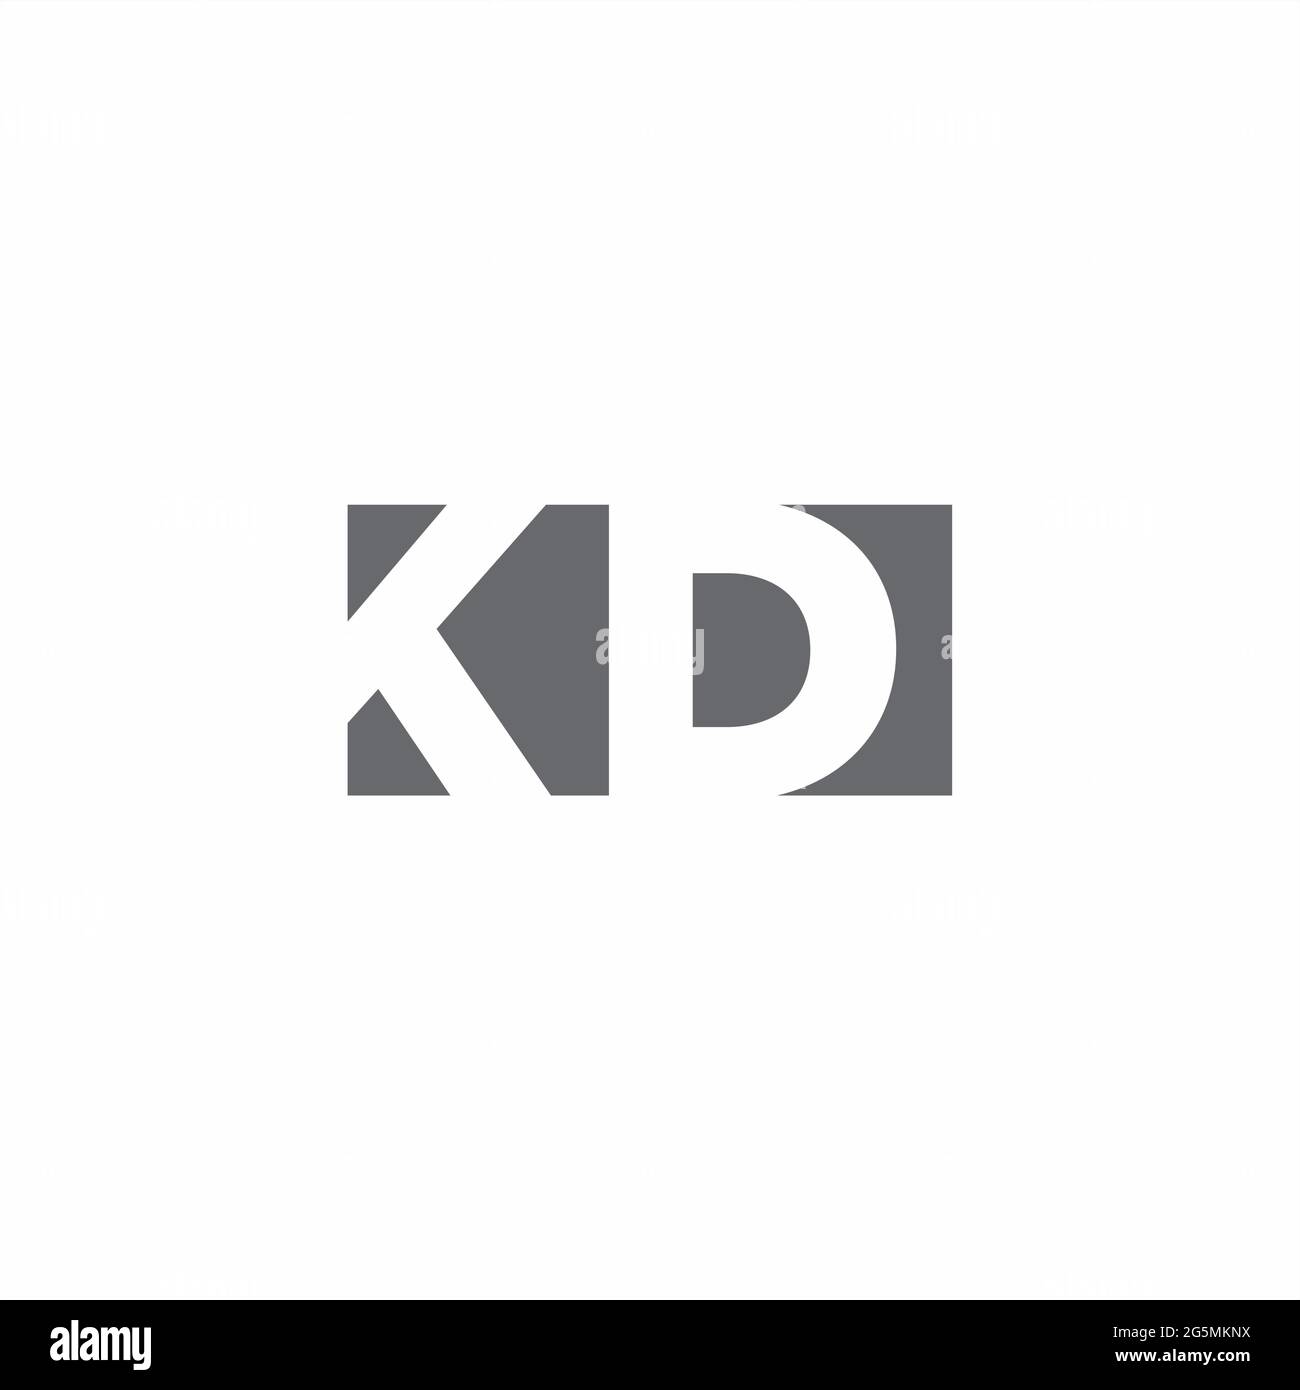 KD Logo monogram with negative space style design template isolated on ...